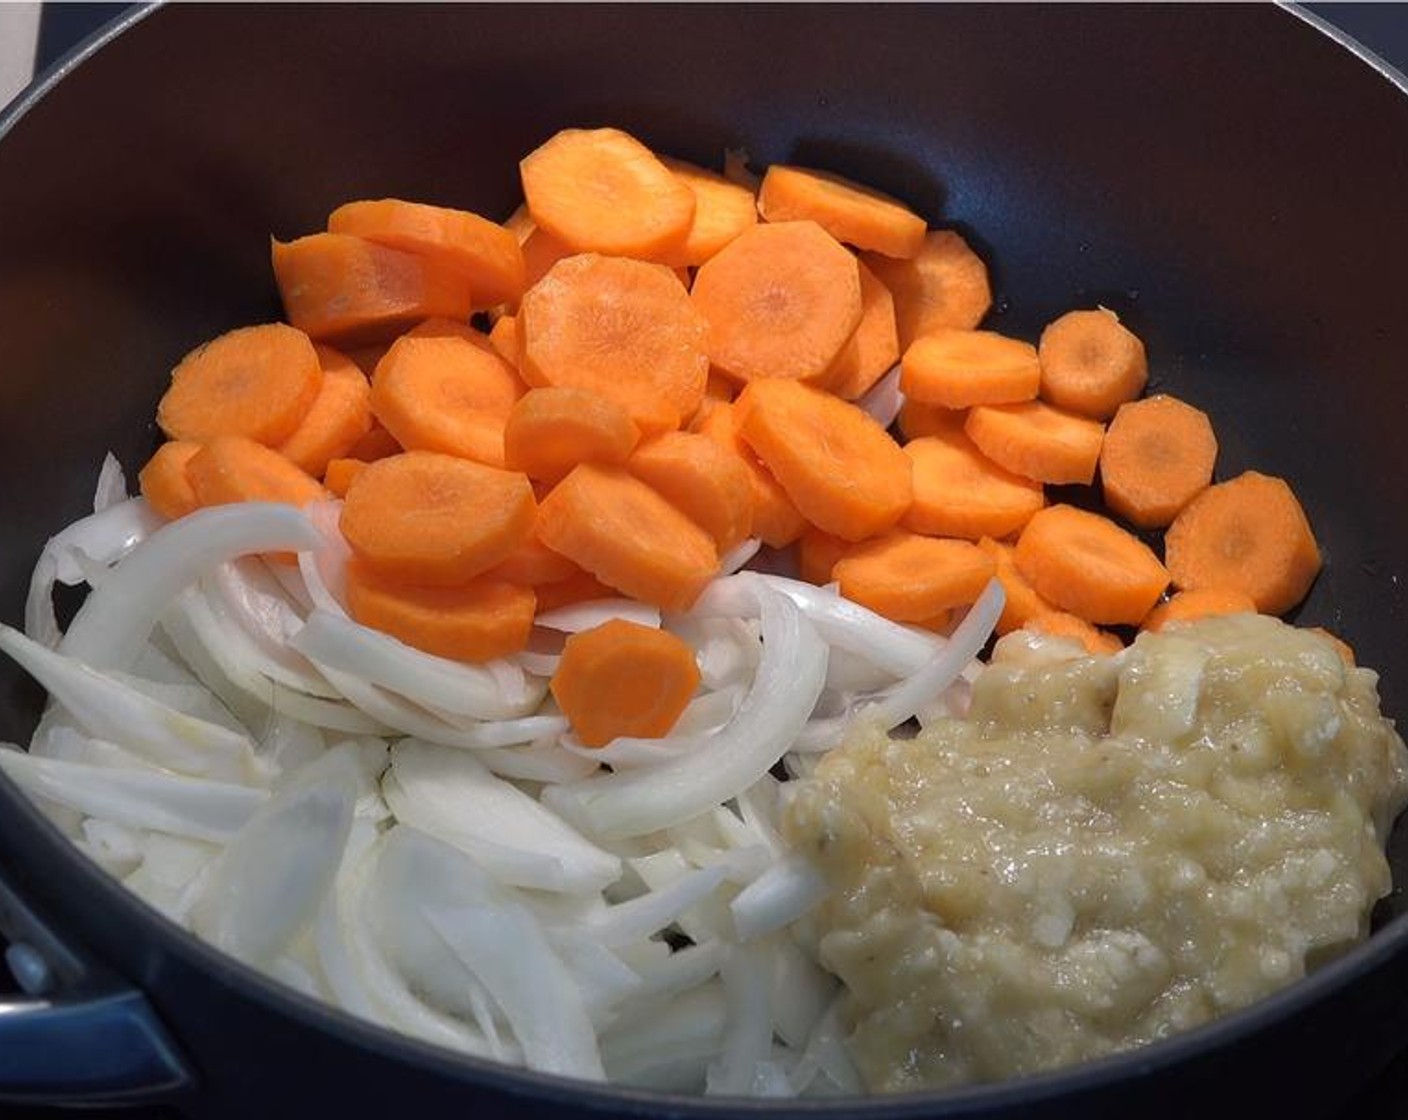 step 1 Pour the Vegetable Oil (as needed) into a pan over low heat. Add in Yellow Onions (2), Carrots (3), and Banana (1). Cook the mix for five minutes while stirring it occasionally, until the onions start to go translucent and the carrots soften.